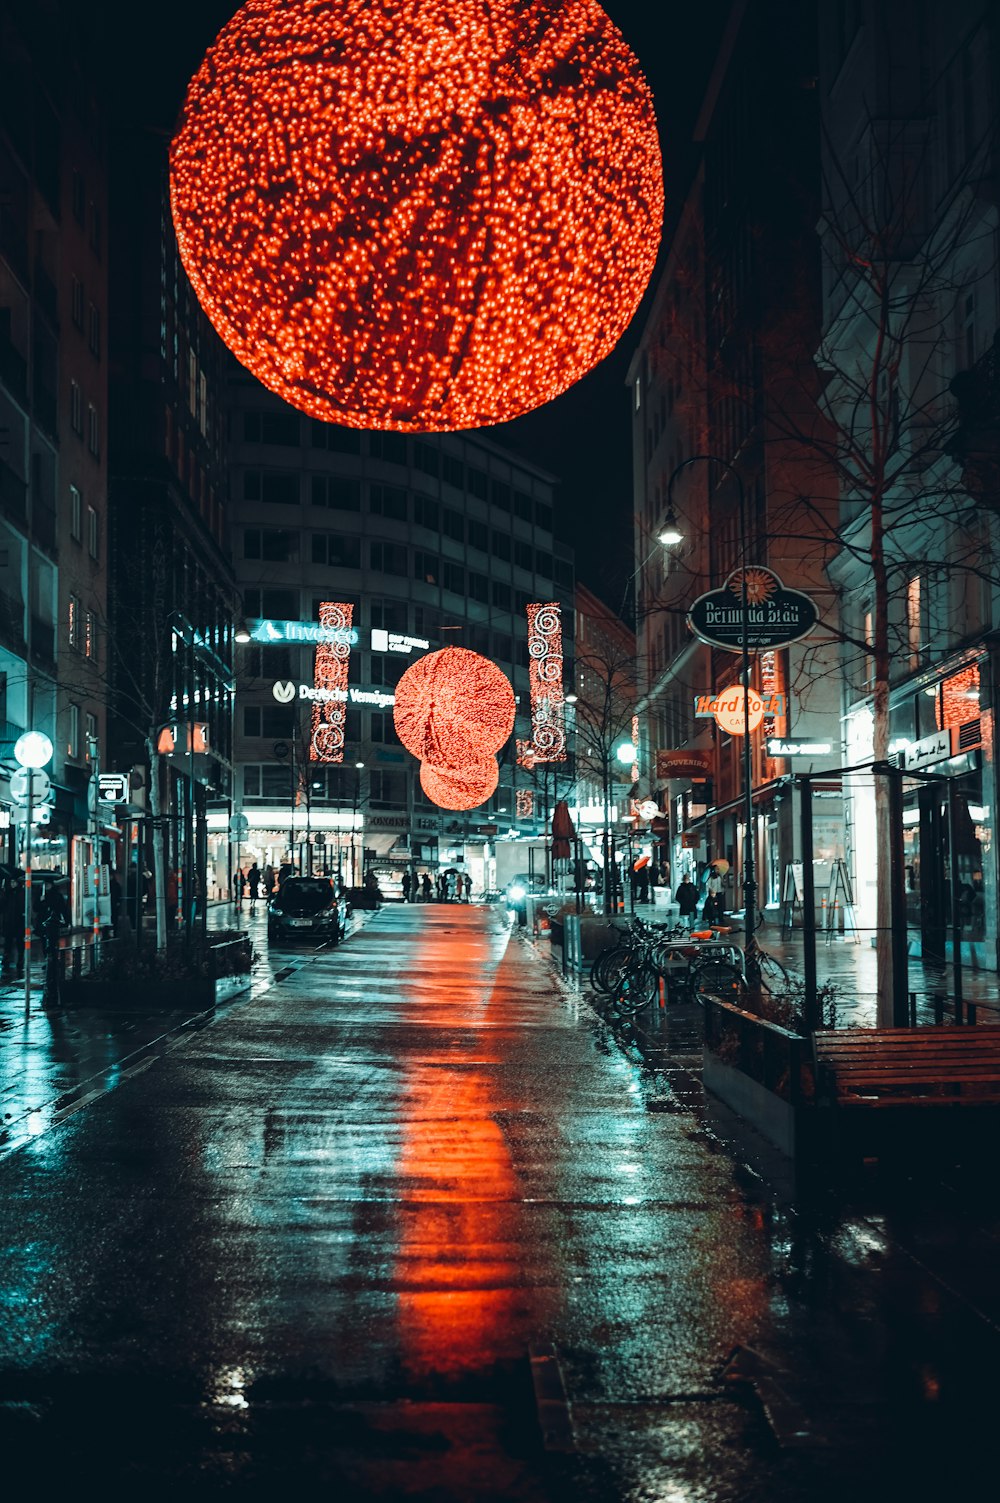 a city street at night with a large red ball hanging from the ceiling